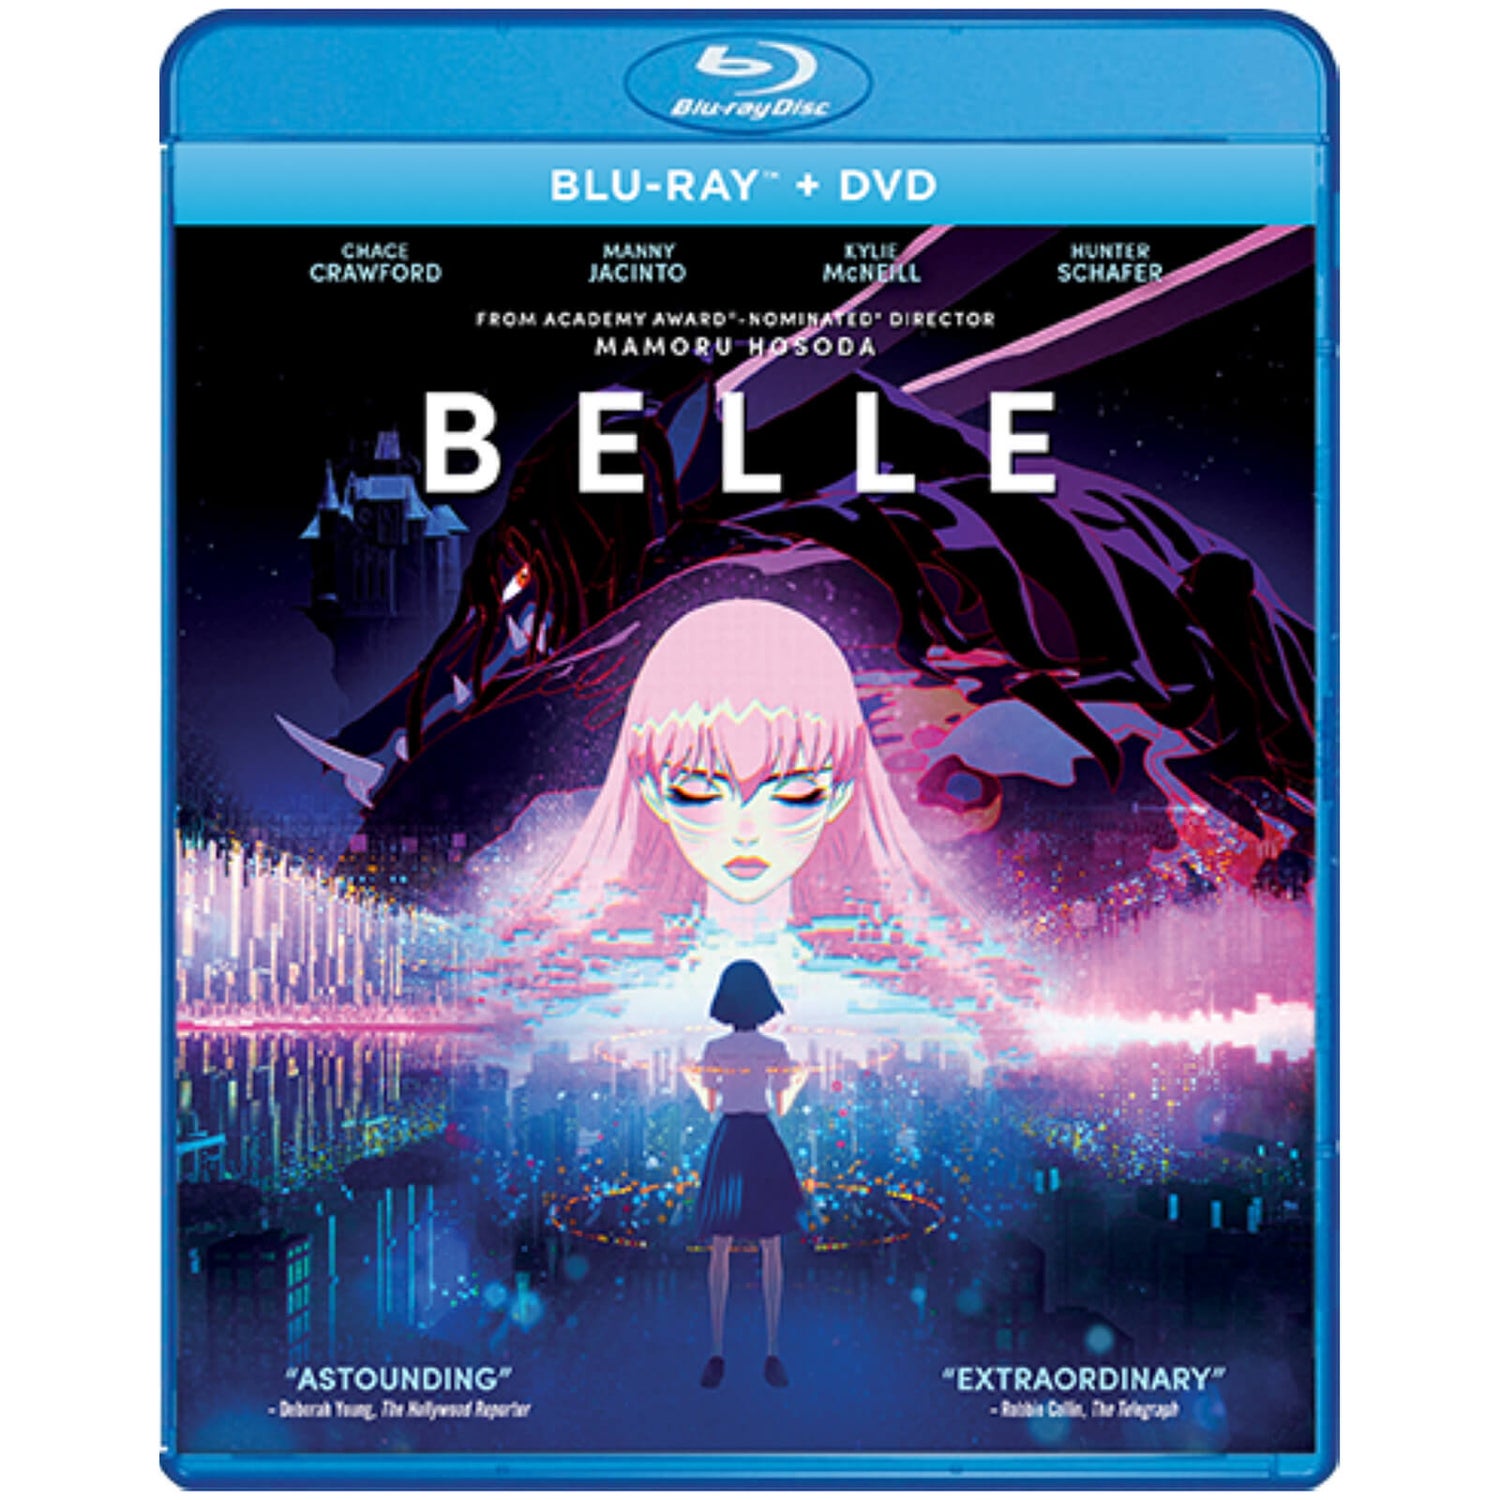 Belle (Includes DVD)